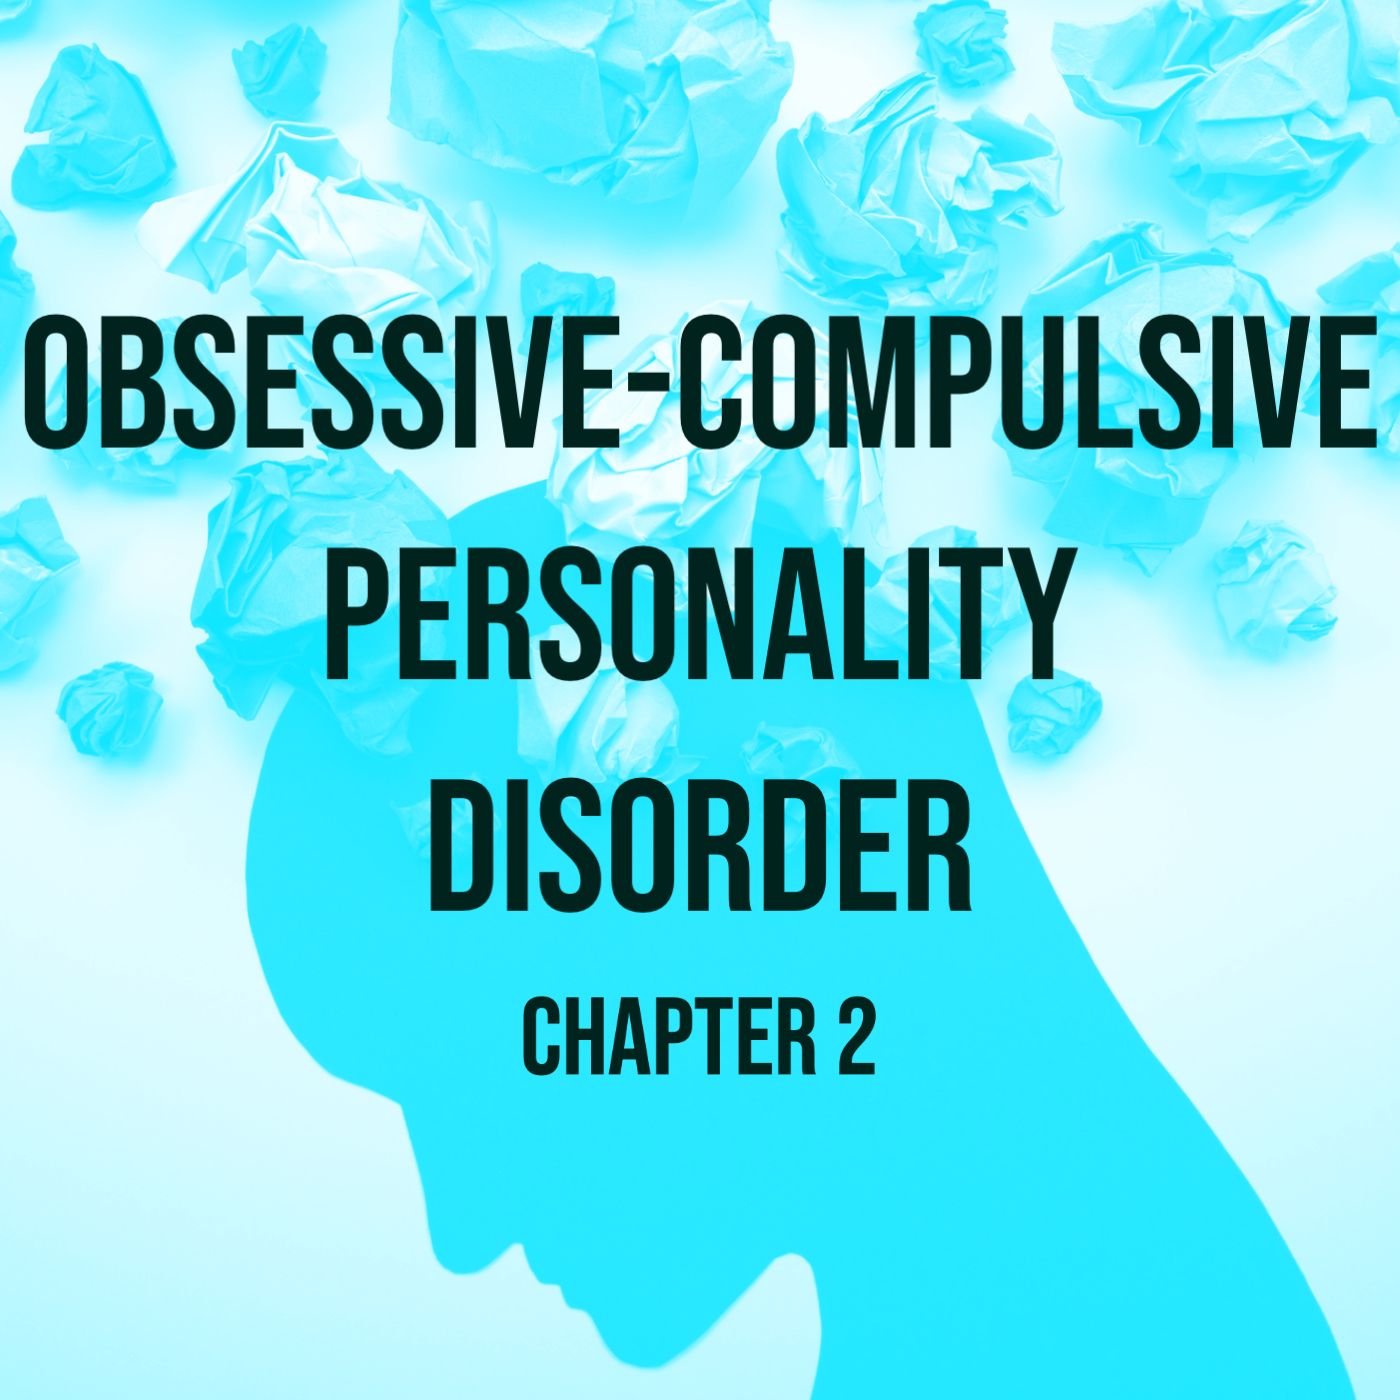 Obsessive-Compulsive Personality Disorder (Deep Dive) - Chapter 2